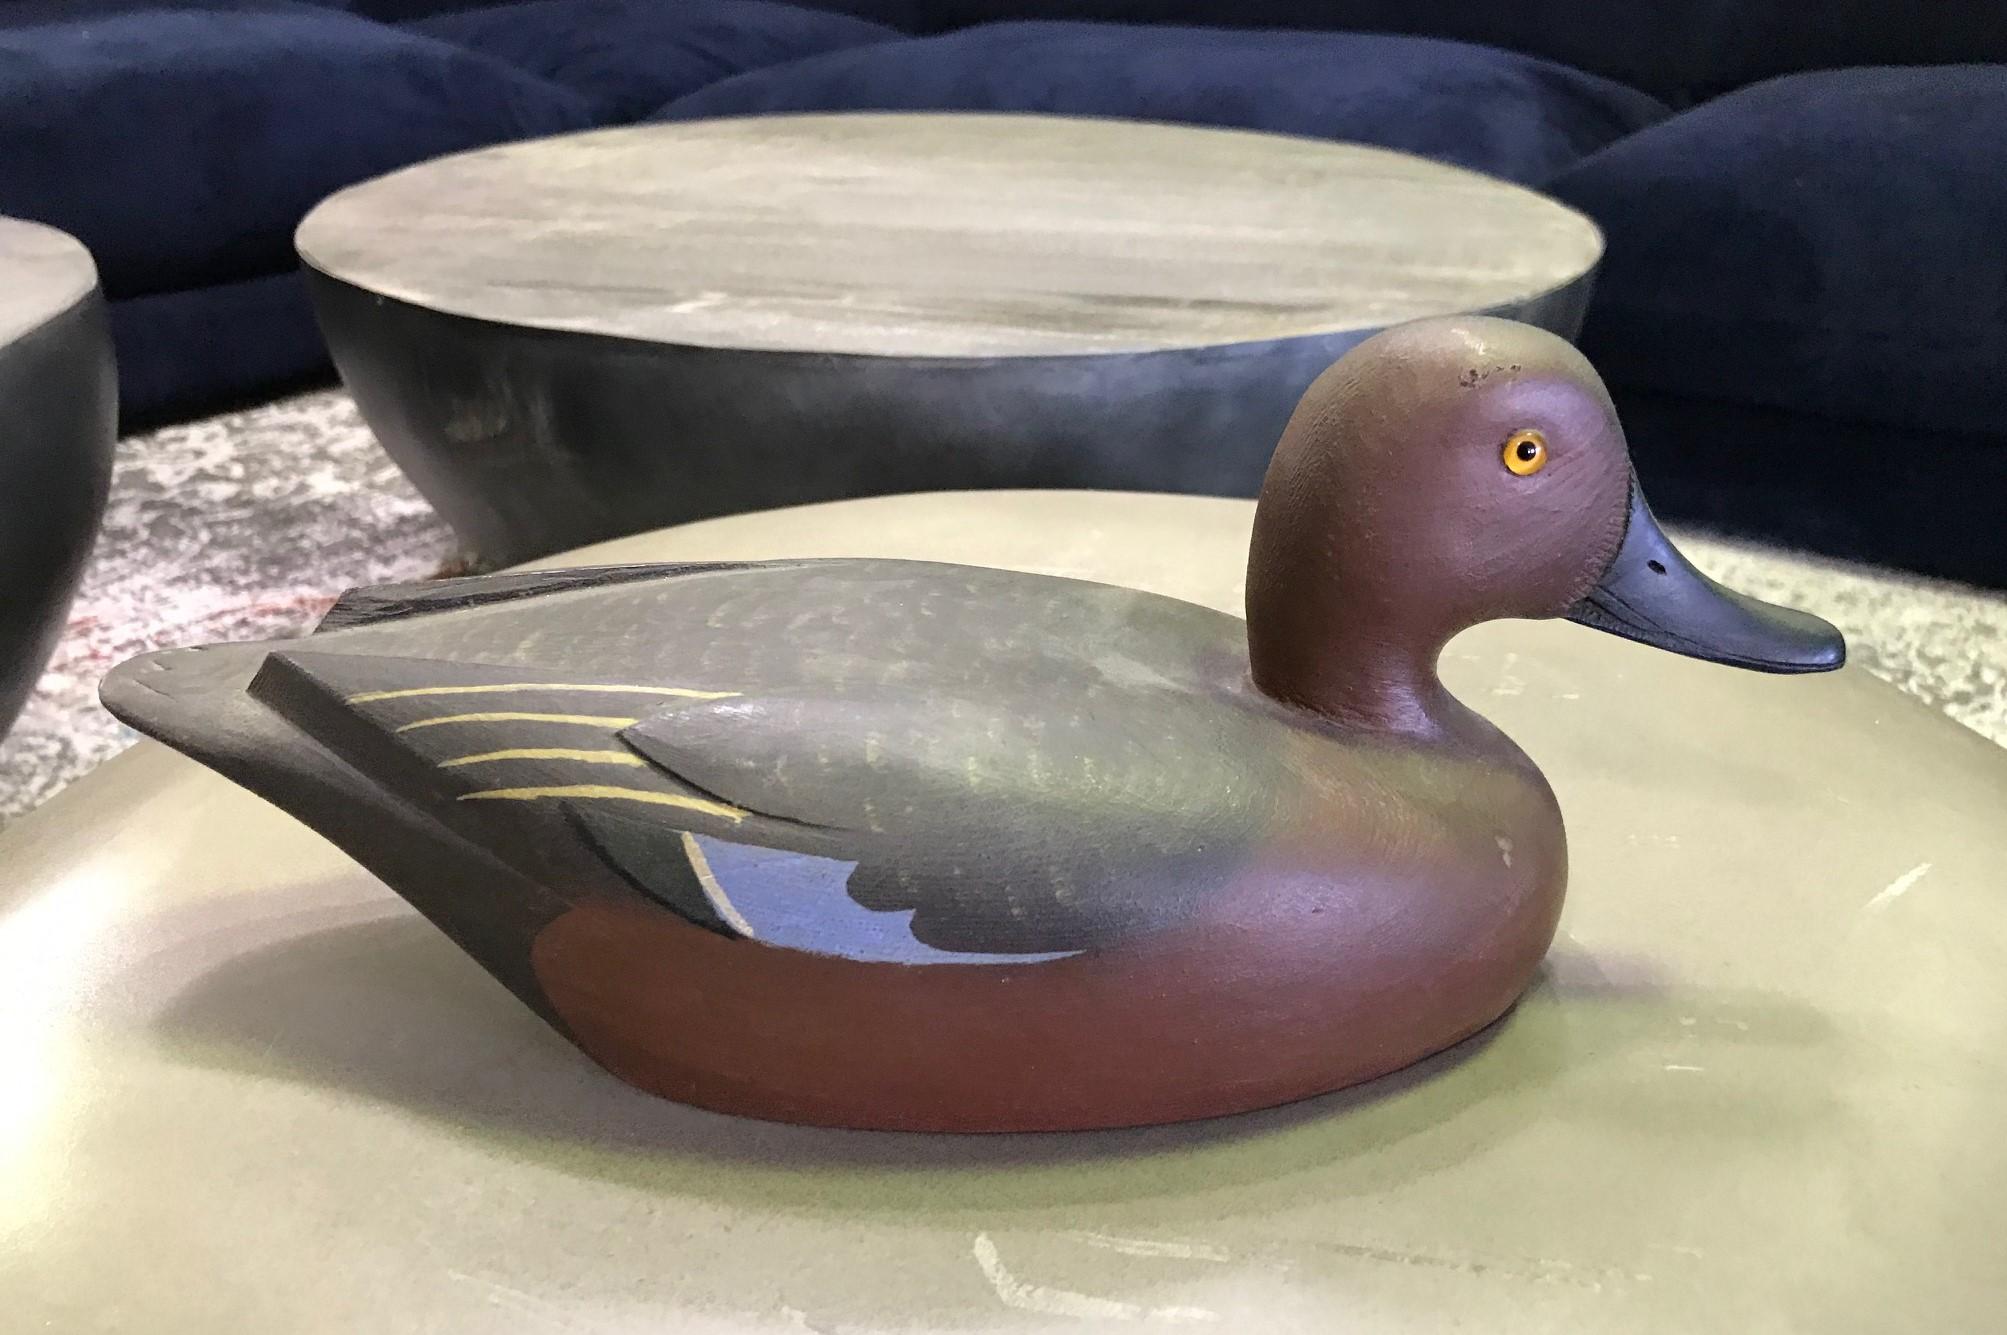 A wonderful work, a male cinnamon teal, hand carved and painted by renowned duck decoy artist D W Nichol. Beautifully crafted and decorated.

The work is signed 